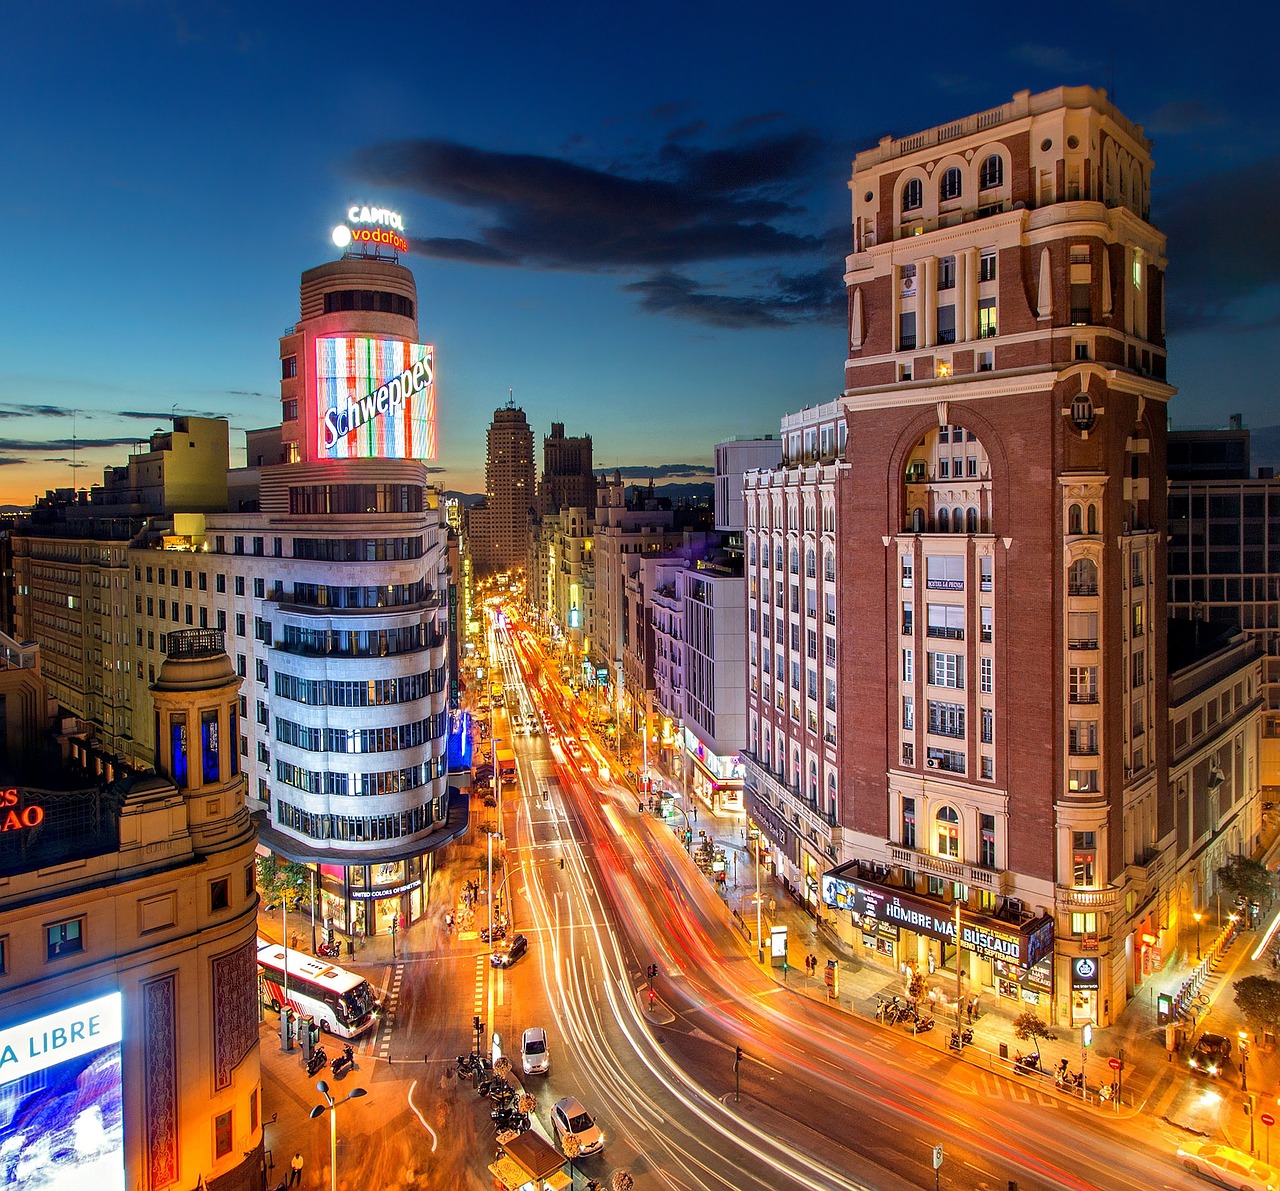 Art, History, and Nightlife in Madrid